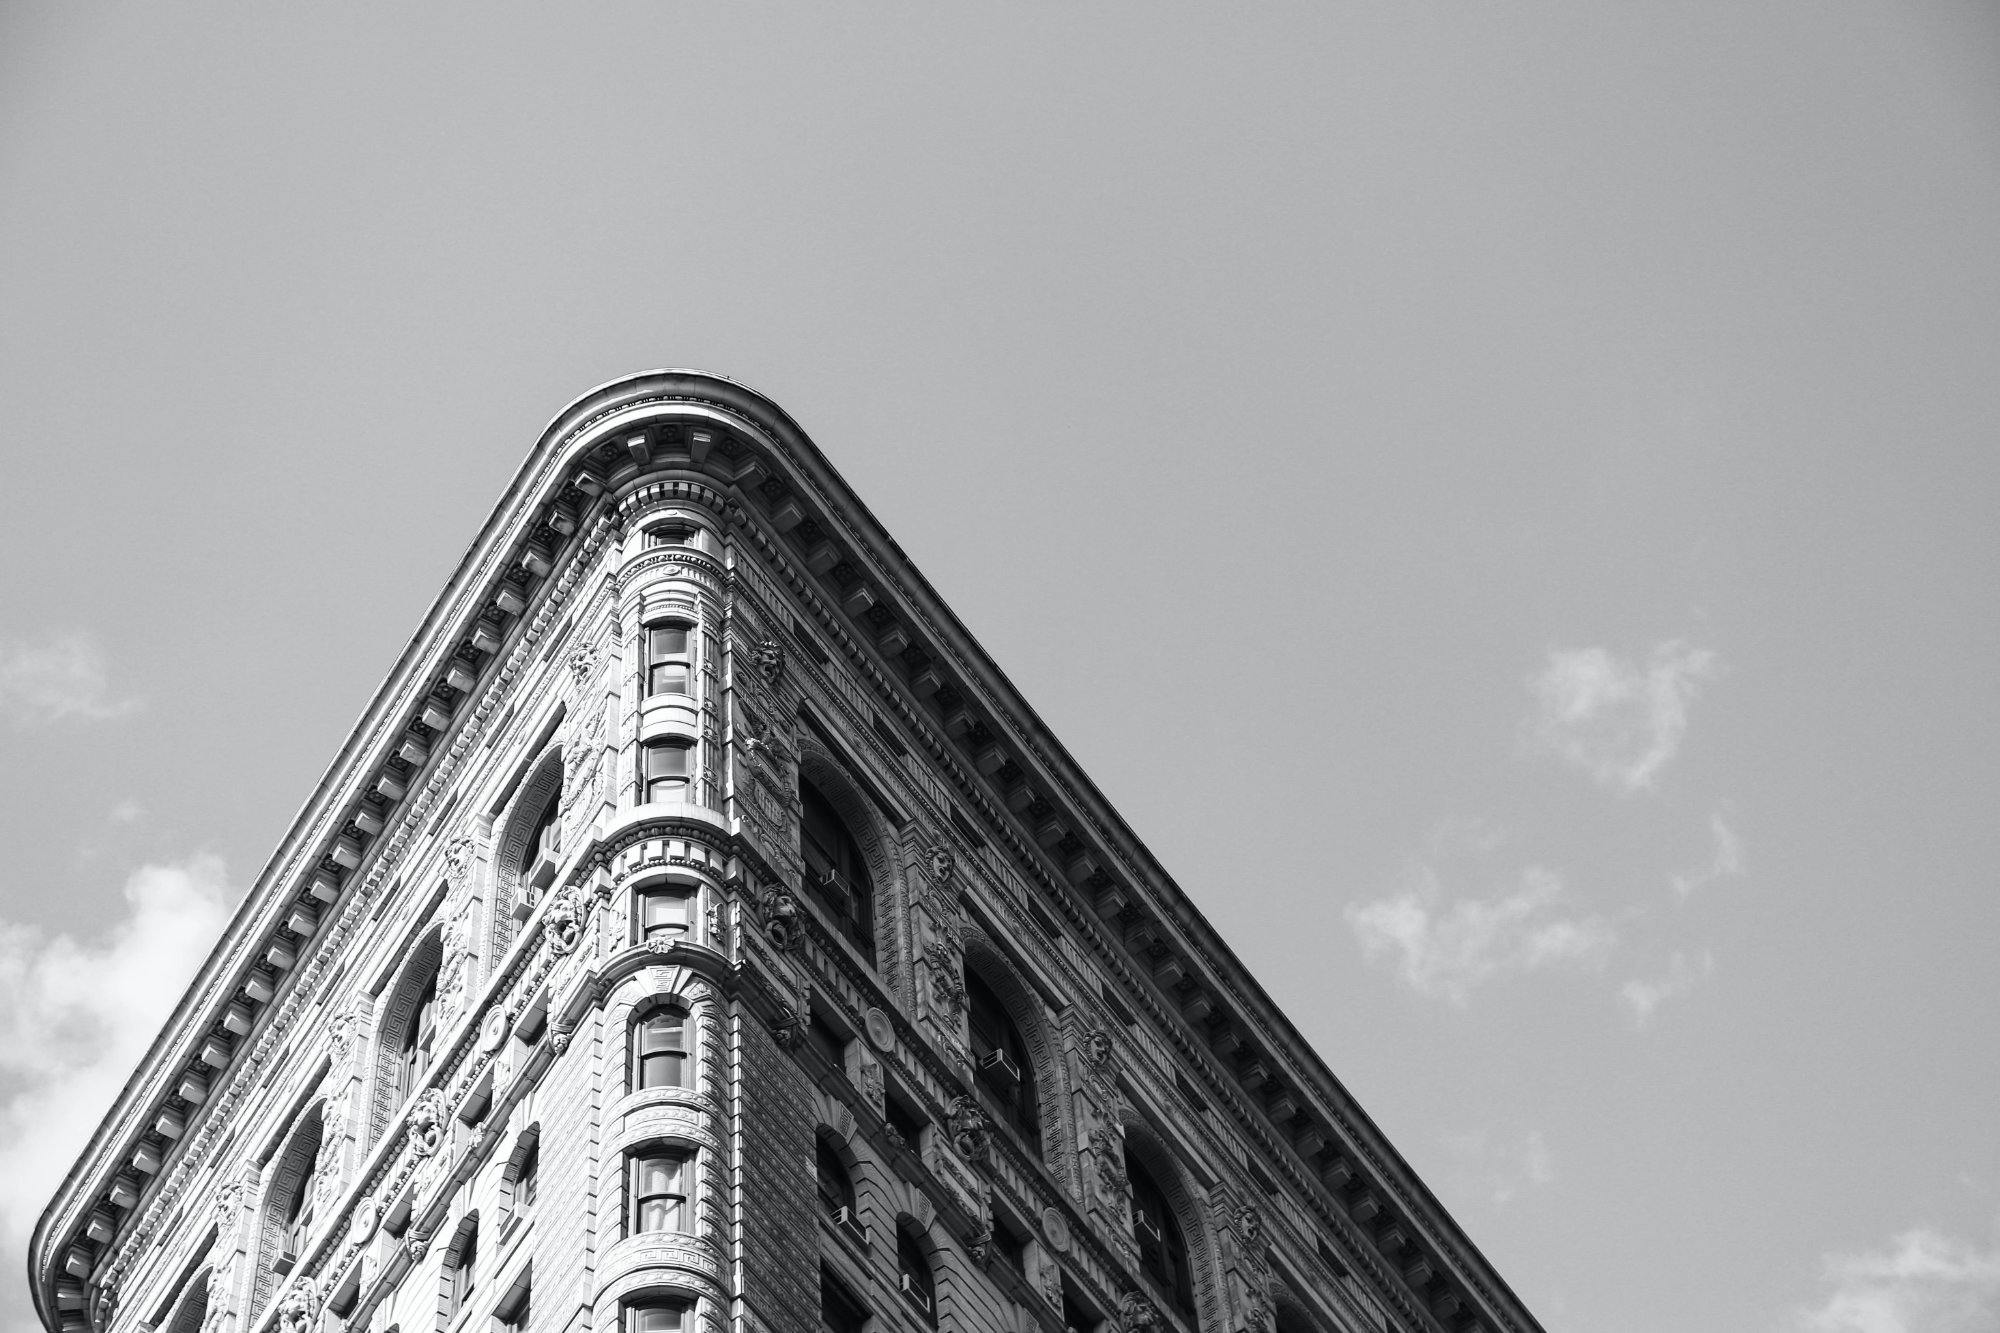 The Flatiron Building: From Office Space to Luxury Apartments